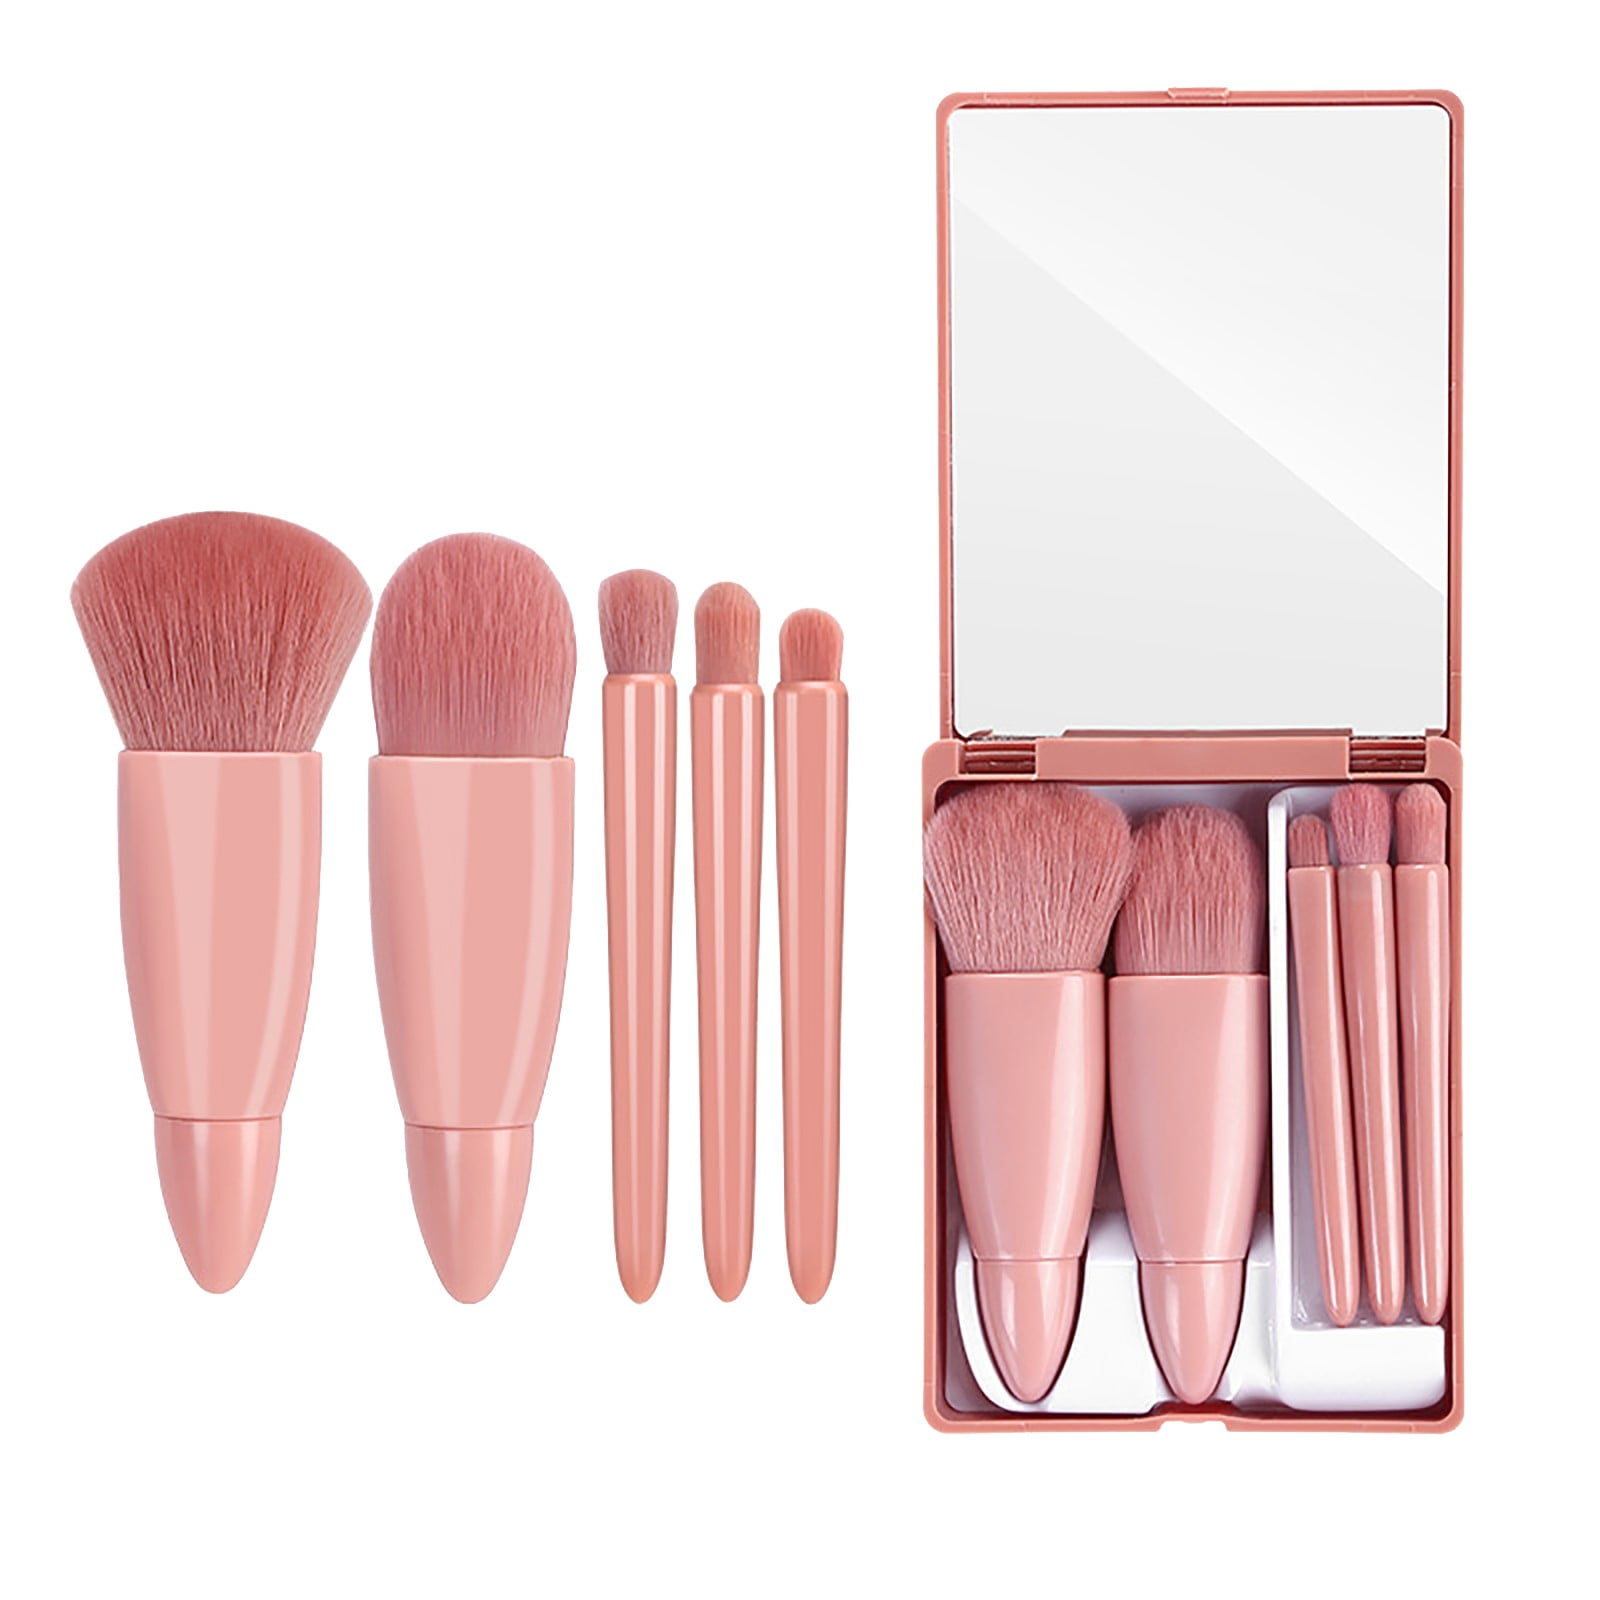 ZIZOCWA Cute Makeup Brushes Easy-Taken Travel Makeup Brush Set,5Pcs Mini  Complete Function Cosmetic Brushes Kit with Mirror Beauty Products for  Teenag